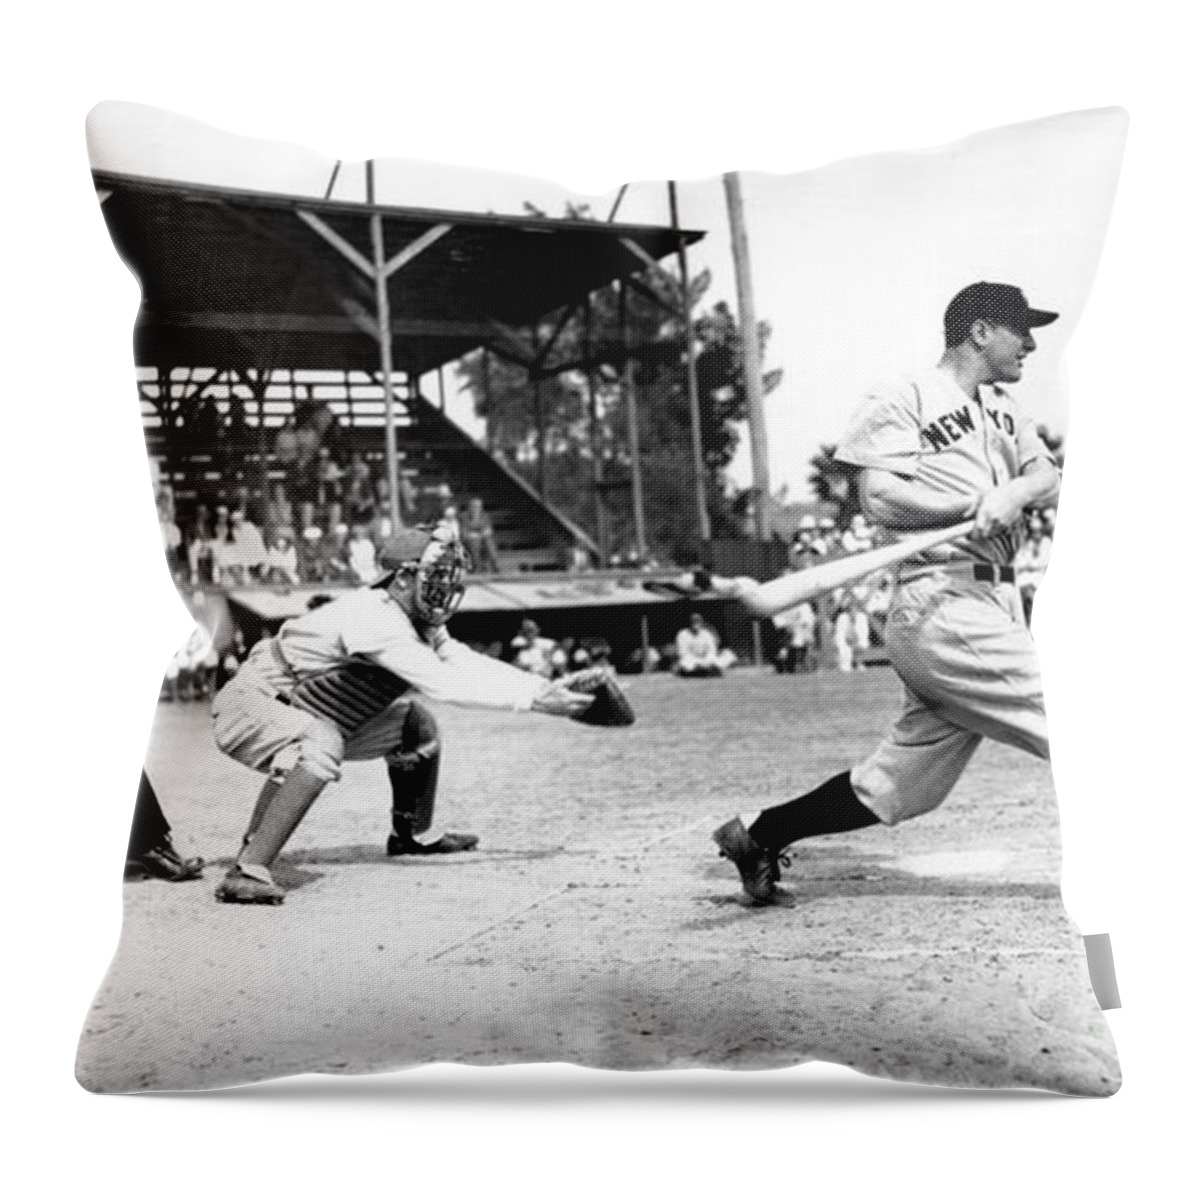 Lou Throw Pillow featuring the photograph Lou Gehrig by Action